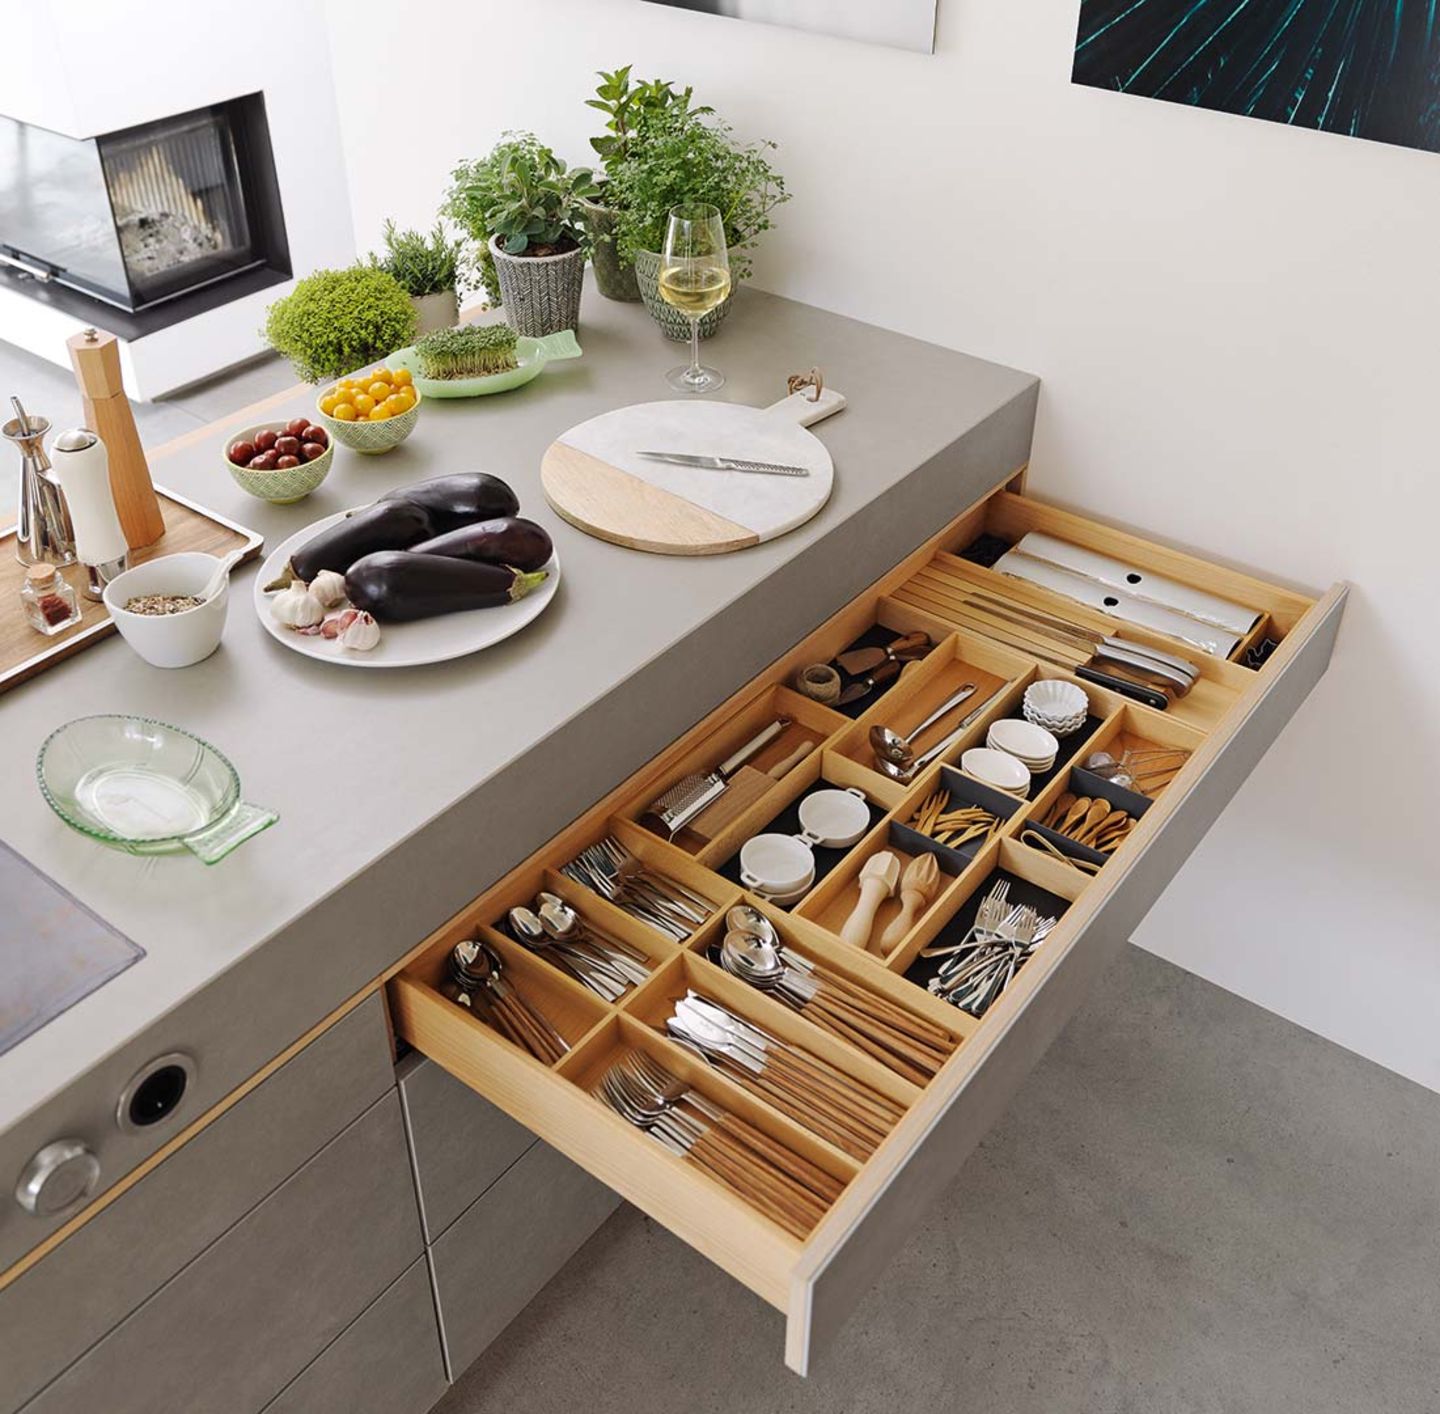 Solid wood filigno kitchen with practical interior layout of the drawers